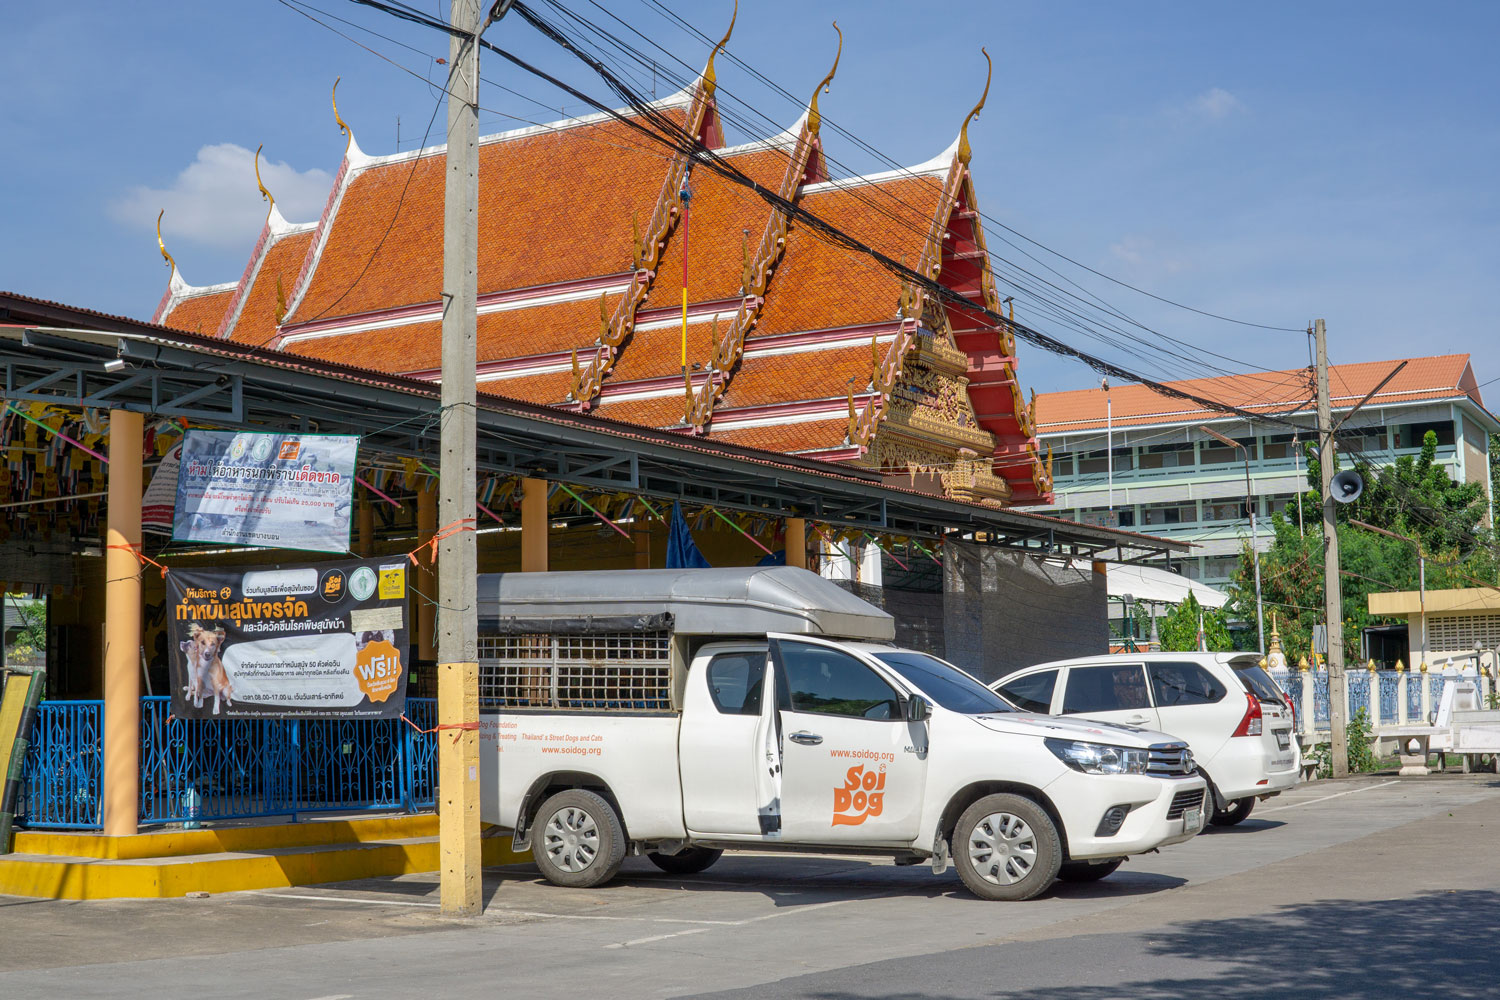 Photo: Soi Dog Foundation / A Soi Dog van at a temple in Bangkok. Sadly, temples are often “dumping grounds” for unwanted dogs and cats.